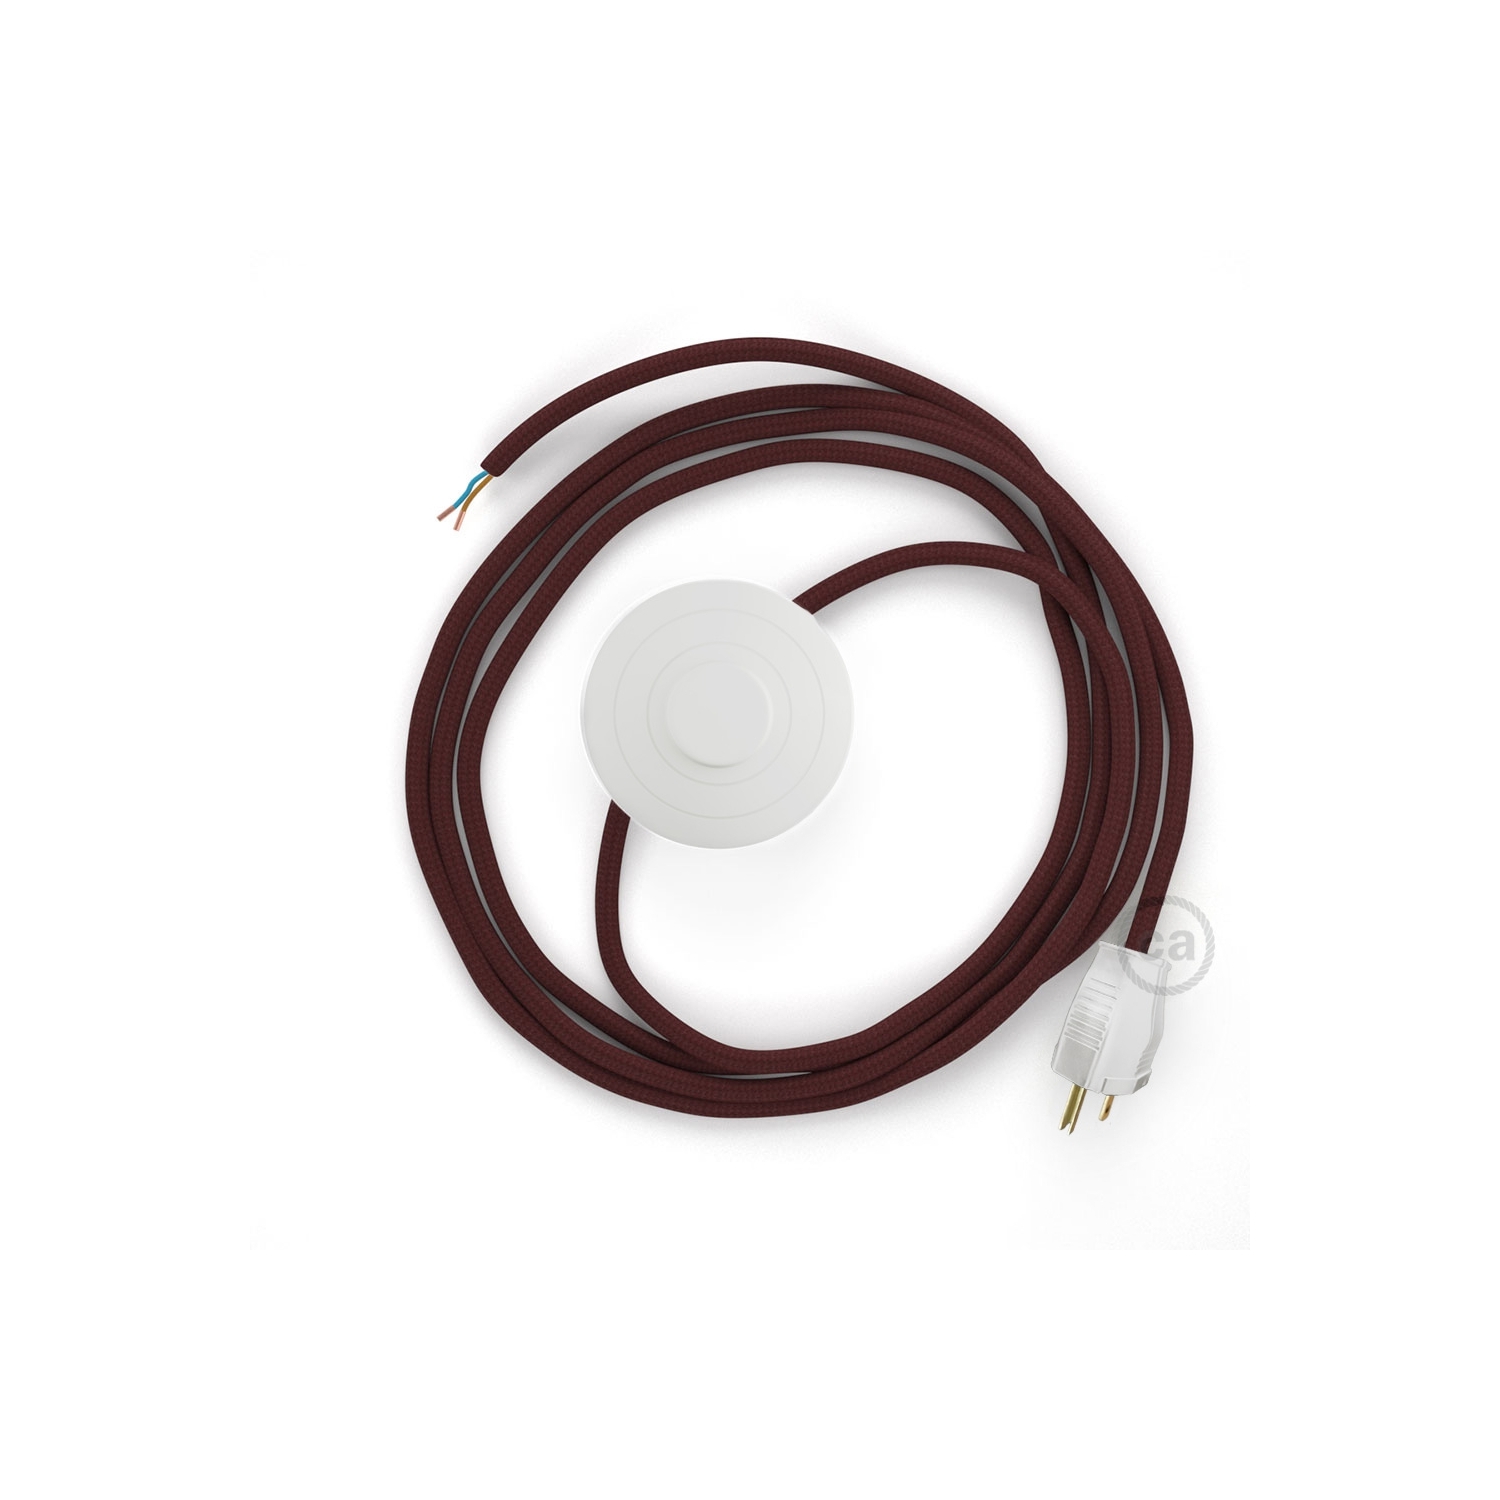 Power Cord with foot switch, RM19 Burgundy Rayon - Choose color of switch/plug